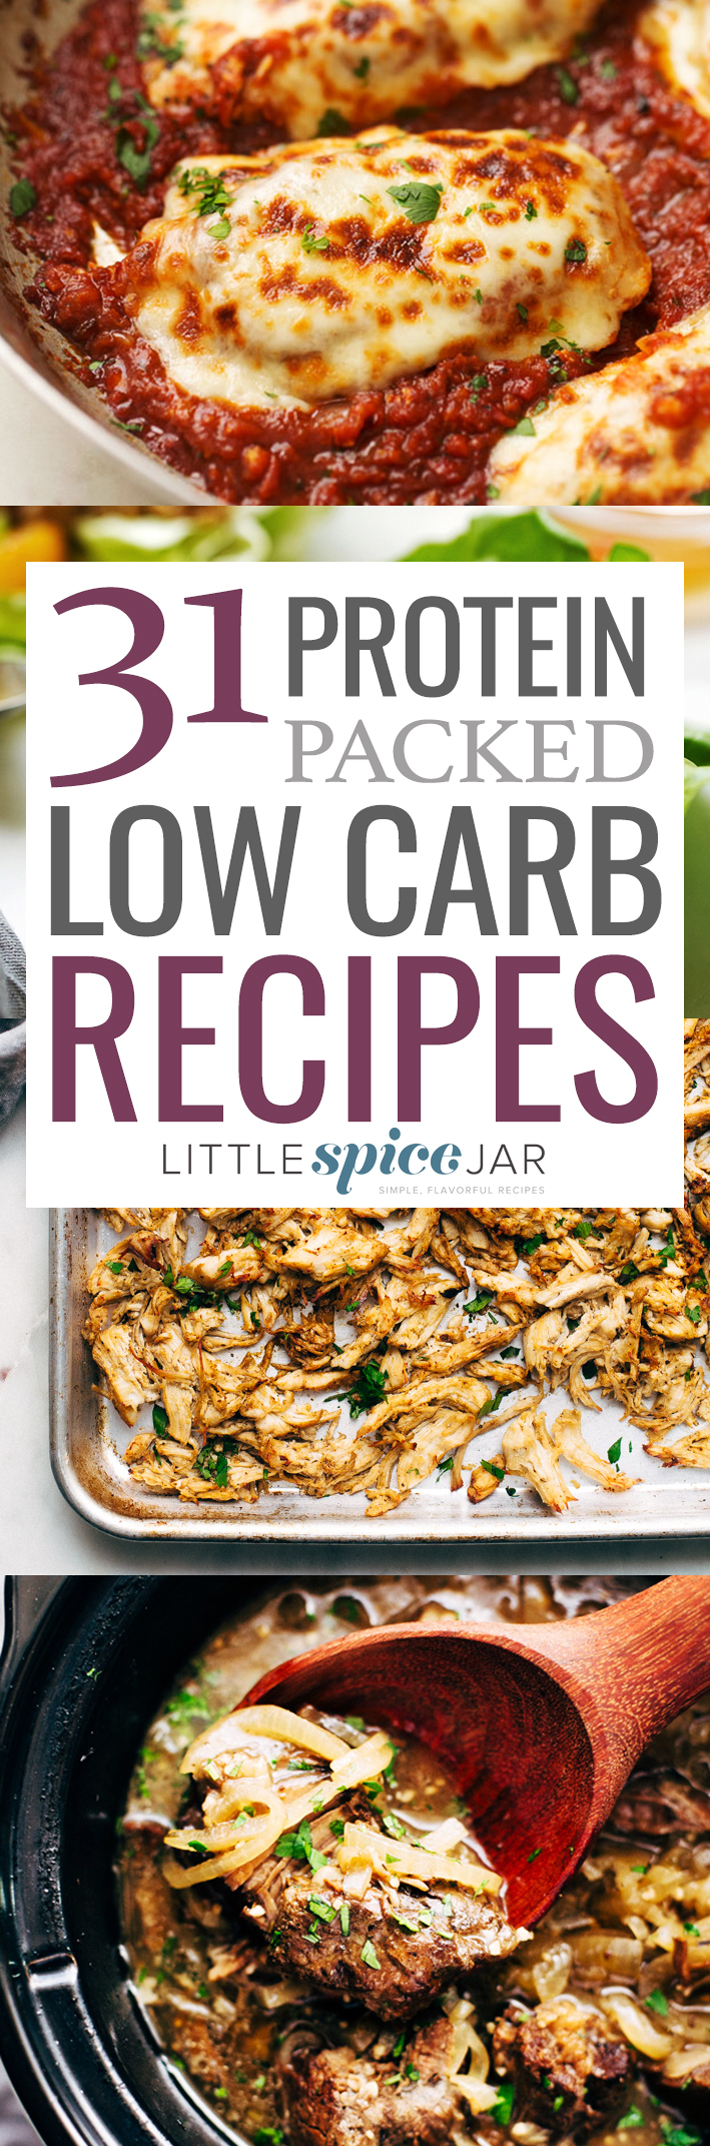 31 Protein Packed Low Carb Recipes - All of these recipes have less than 20 grams of carbs and are all under 500 calories! #lowcarb #protein #dinnerrecipes | Littlespicejar.com @littlespicejar